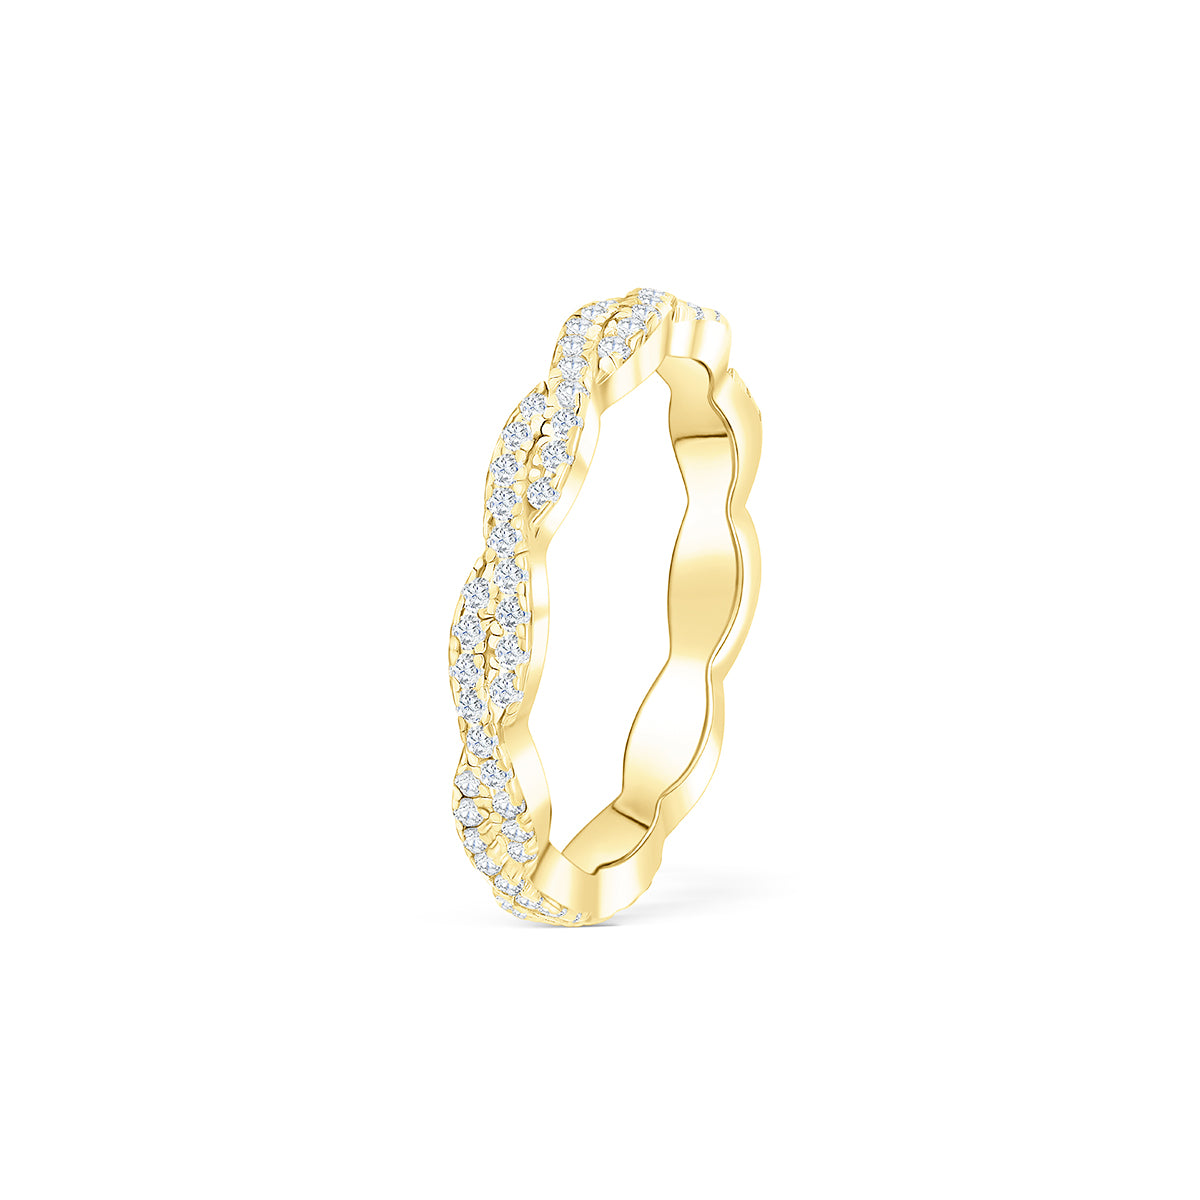 Twisted Gold wedding bands